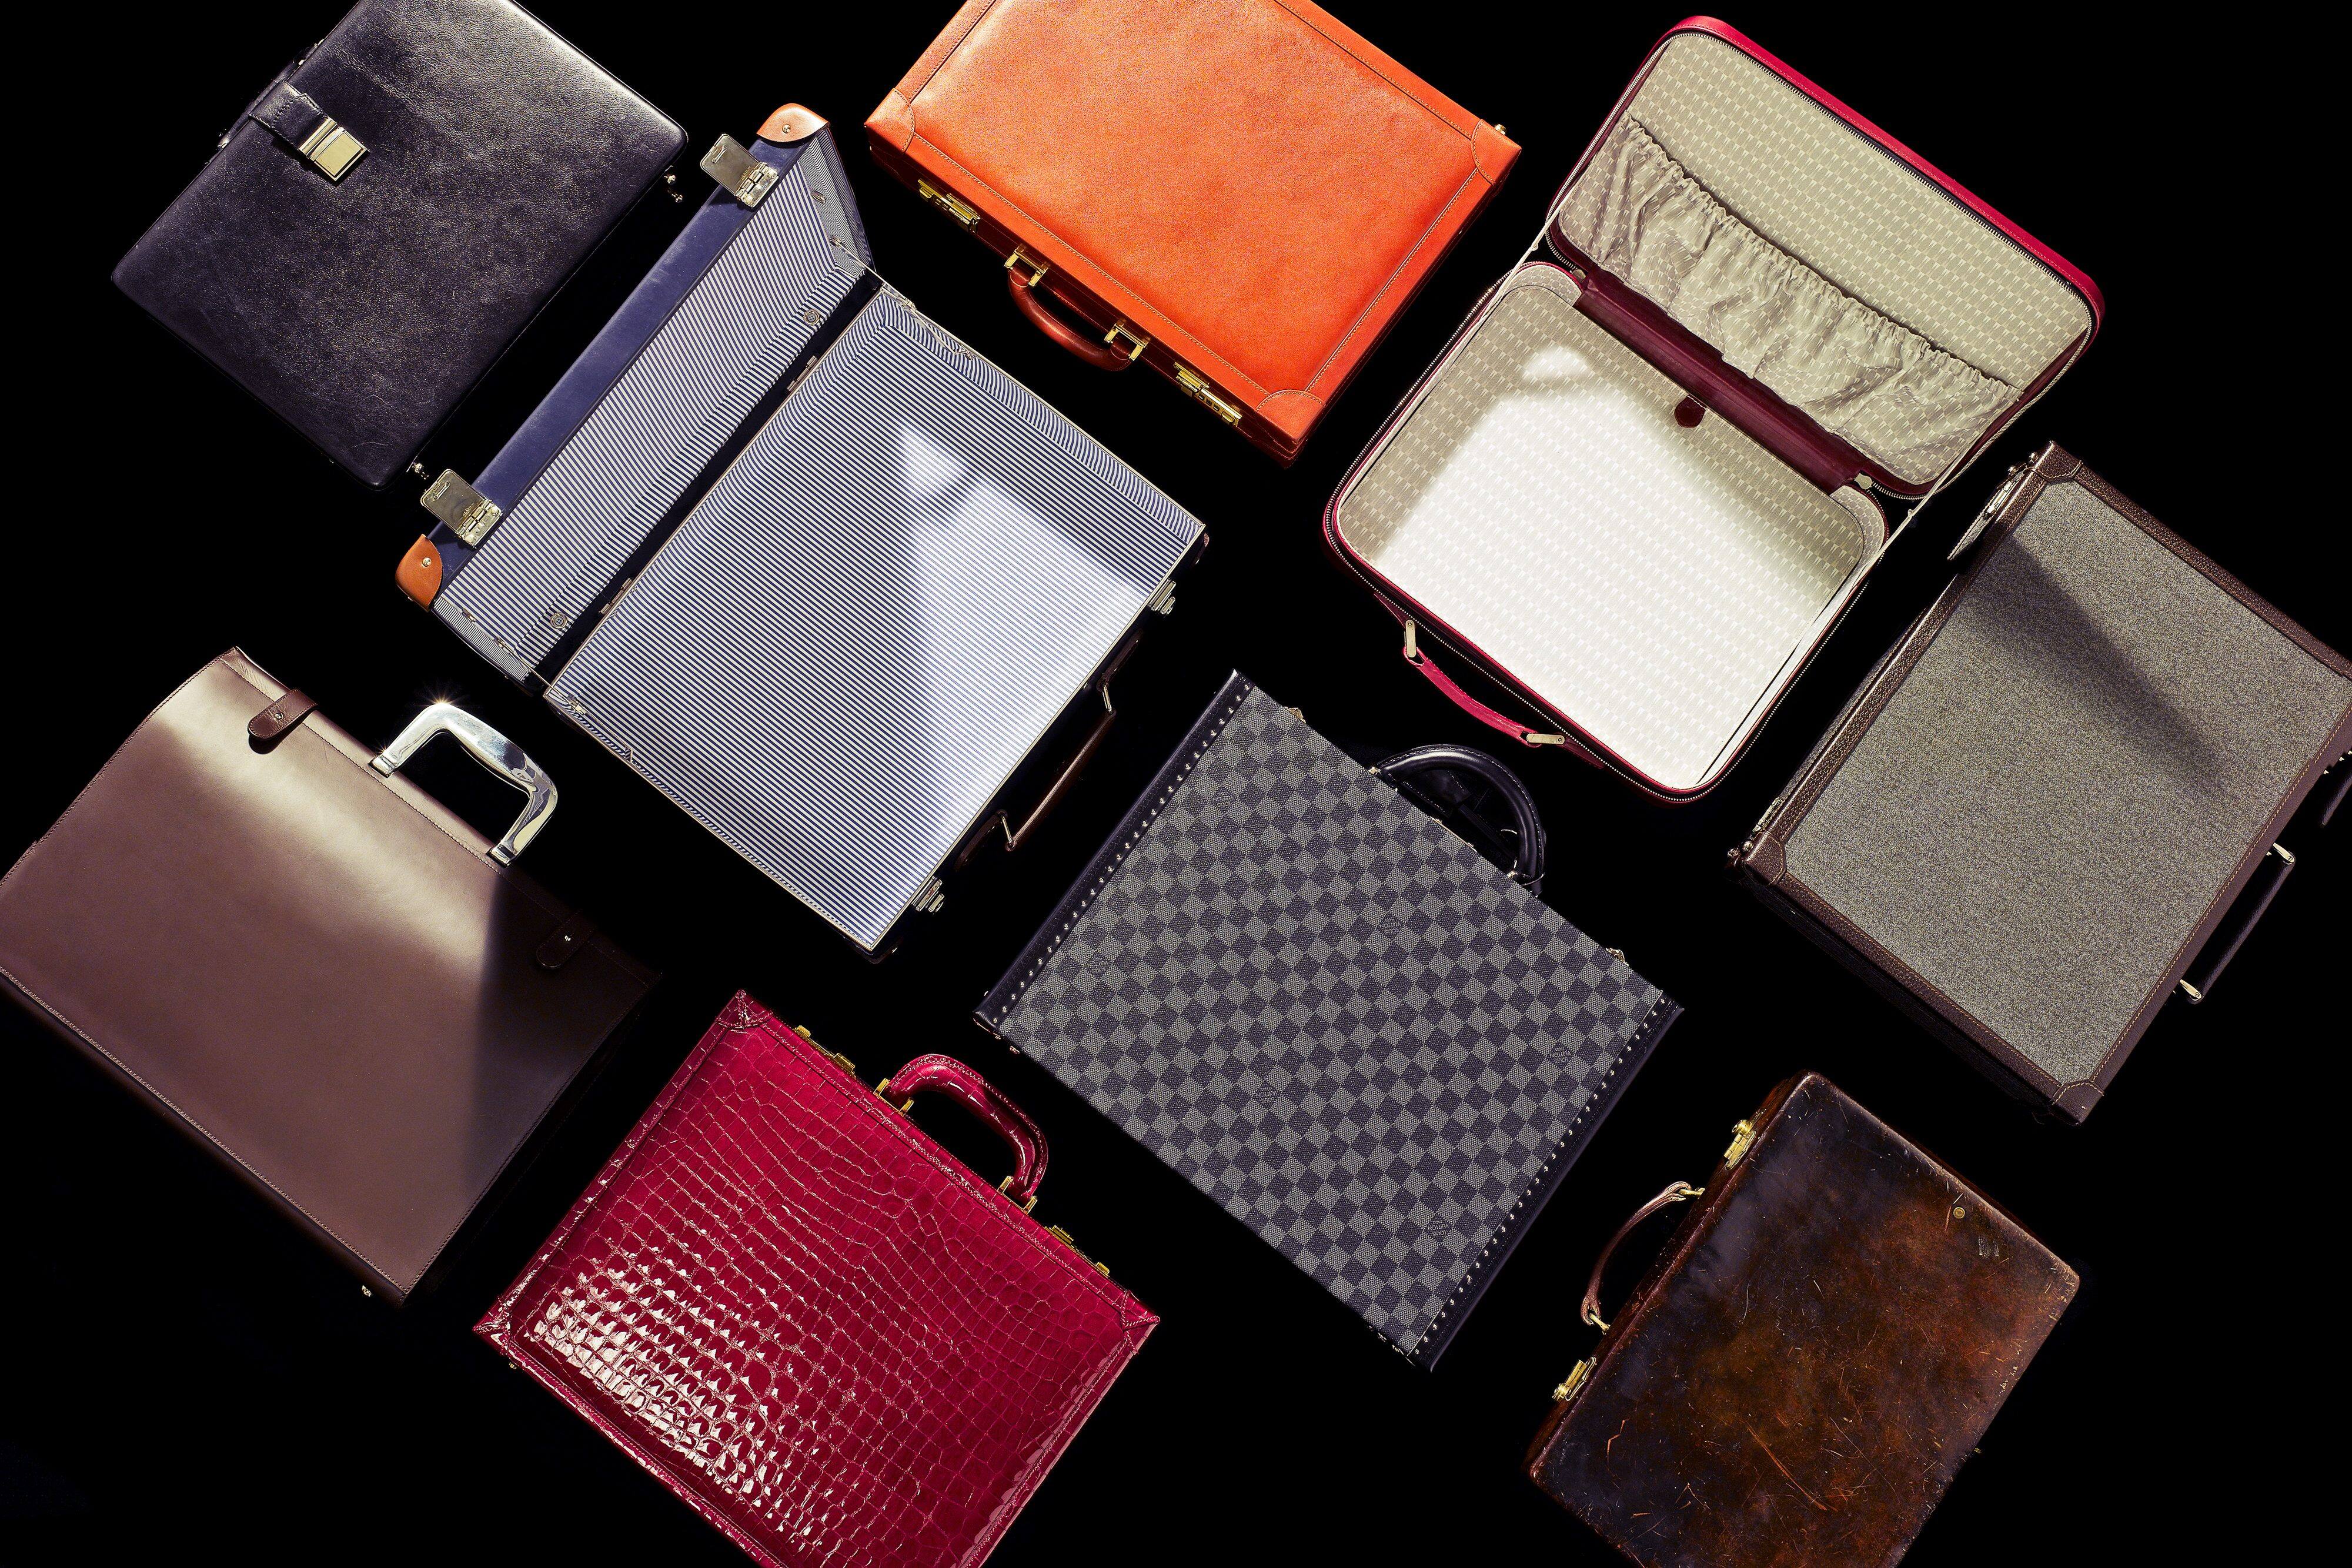 A collection of designer suitcases